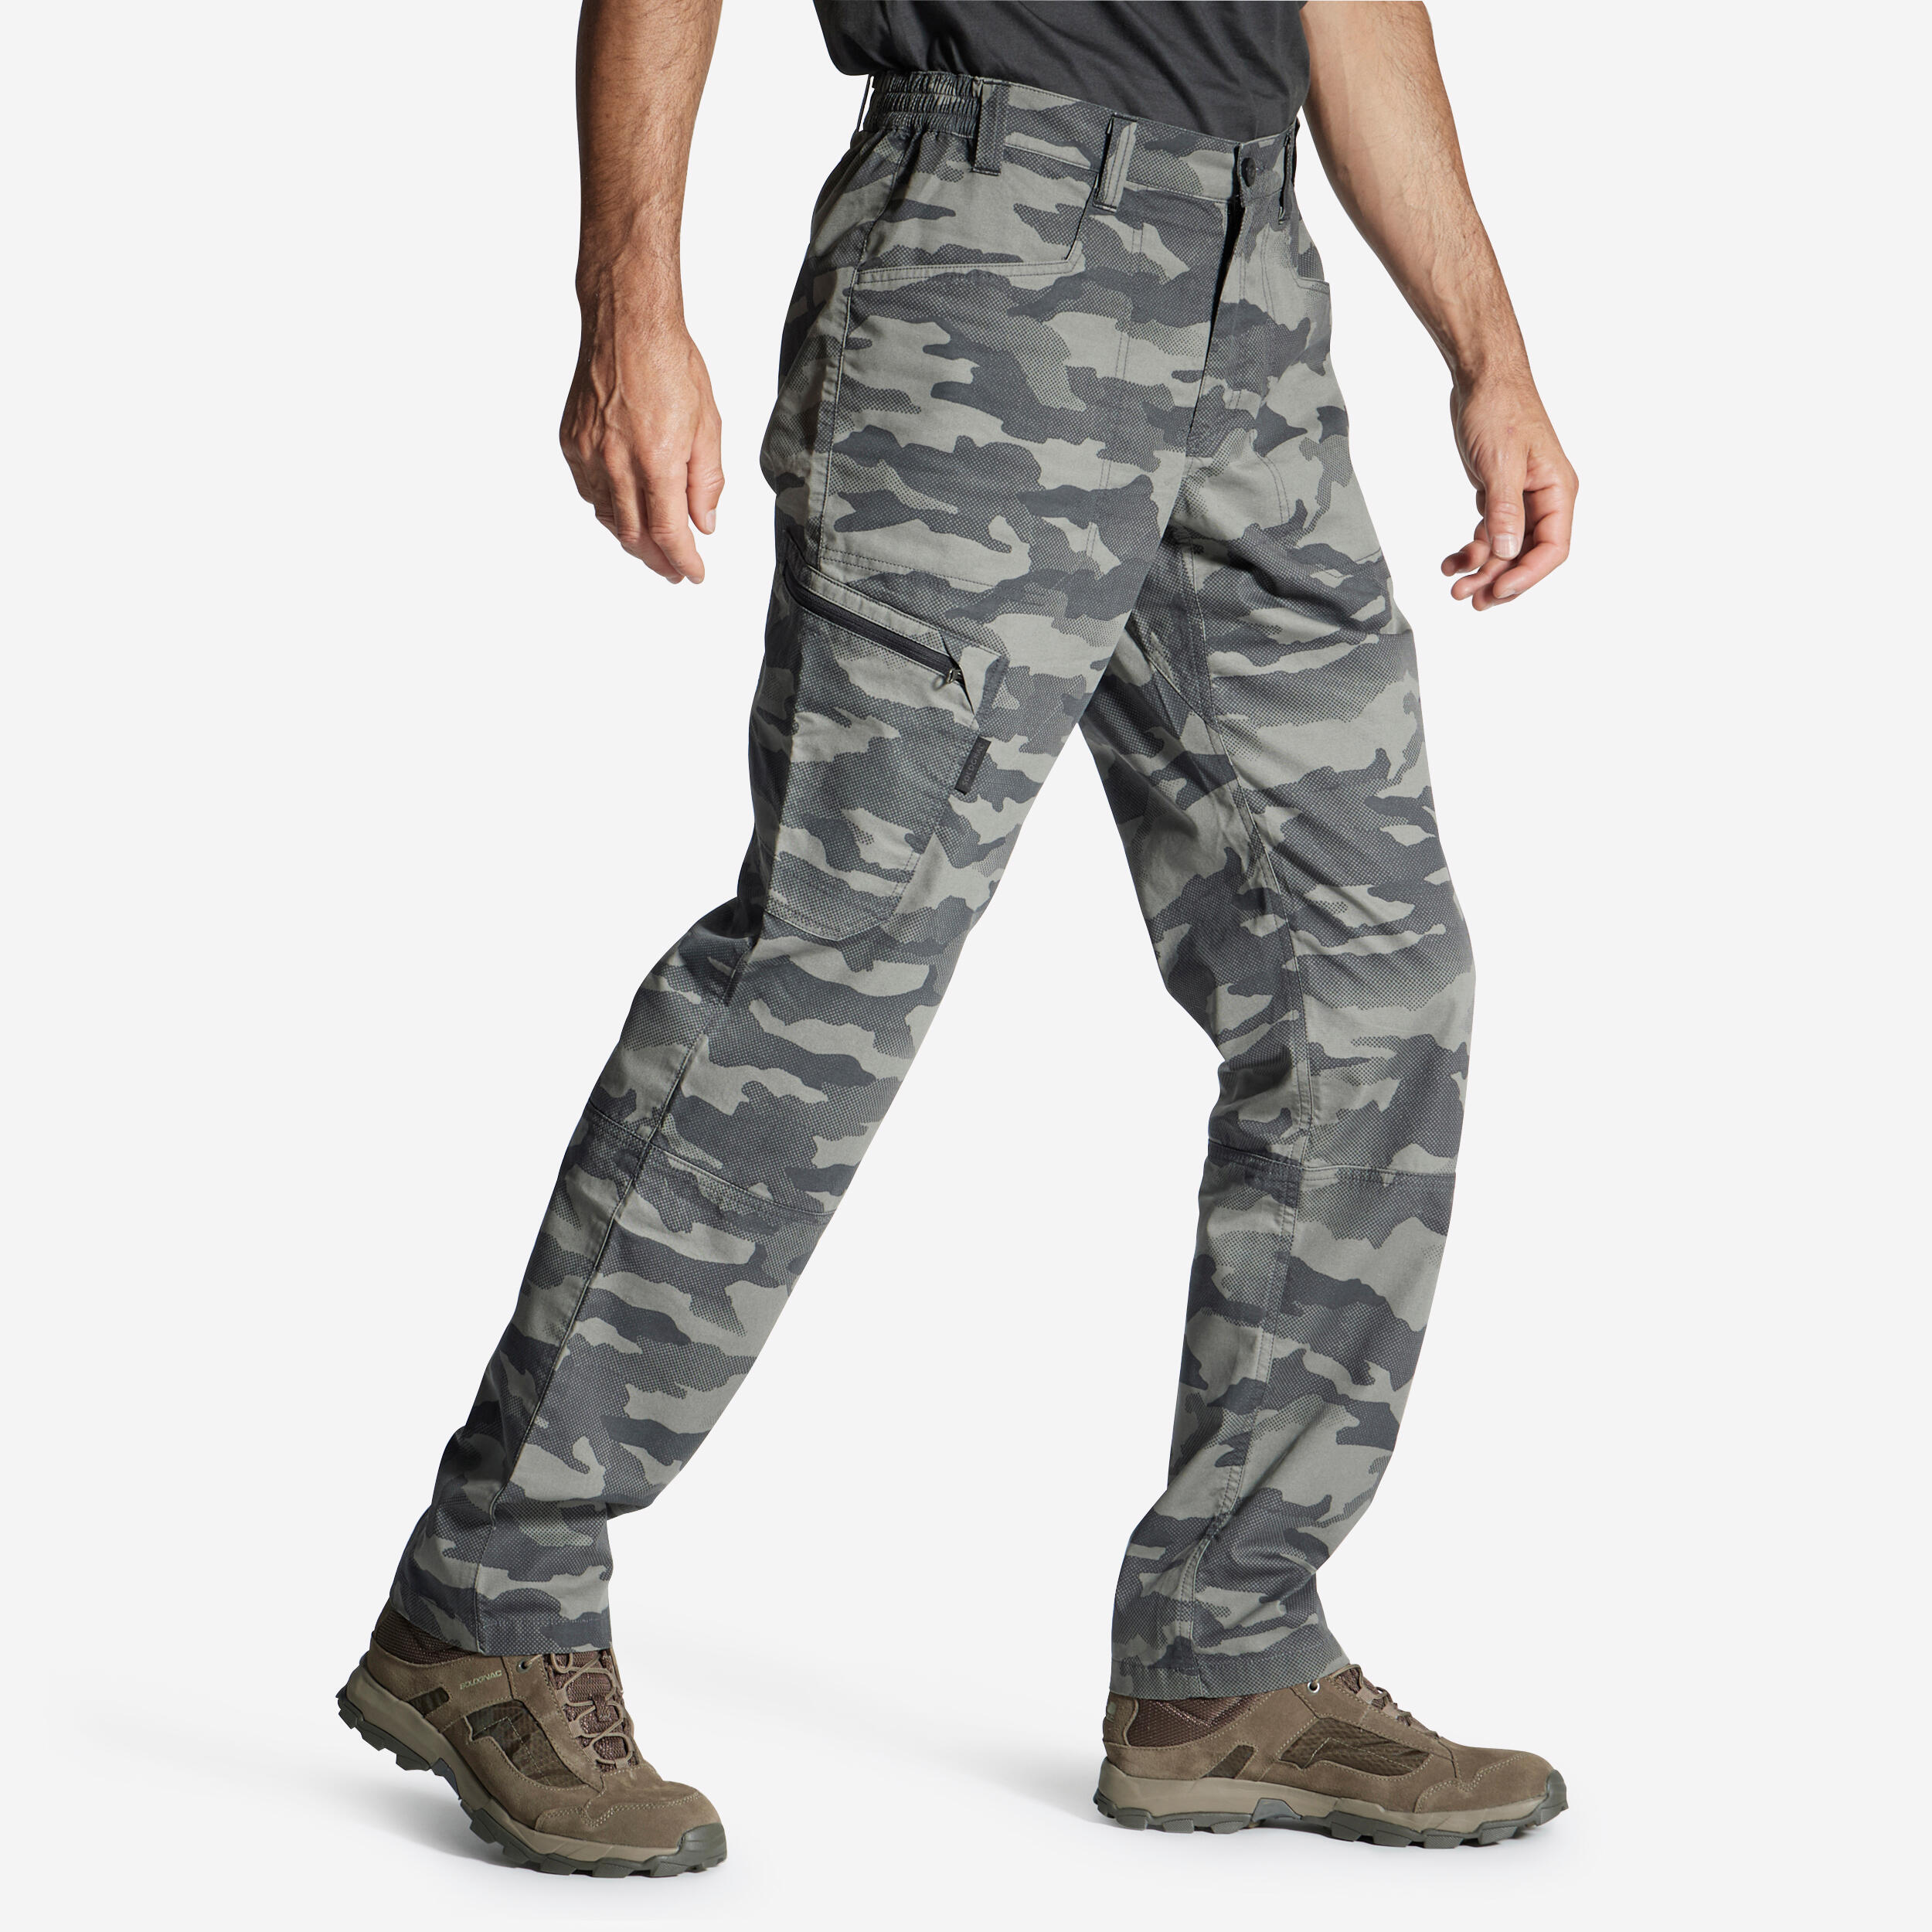 Buy Light Camouflaged Pants for Outdoor Sports at decathlonin